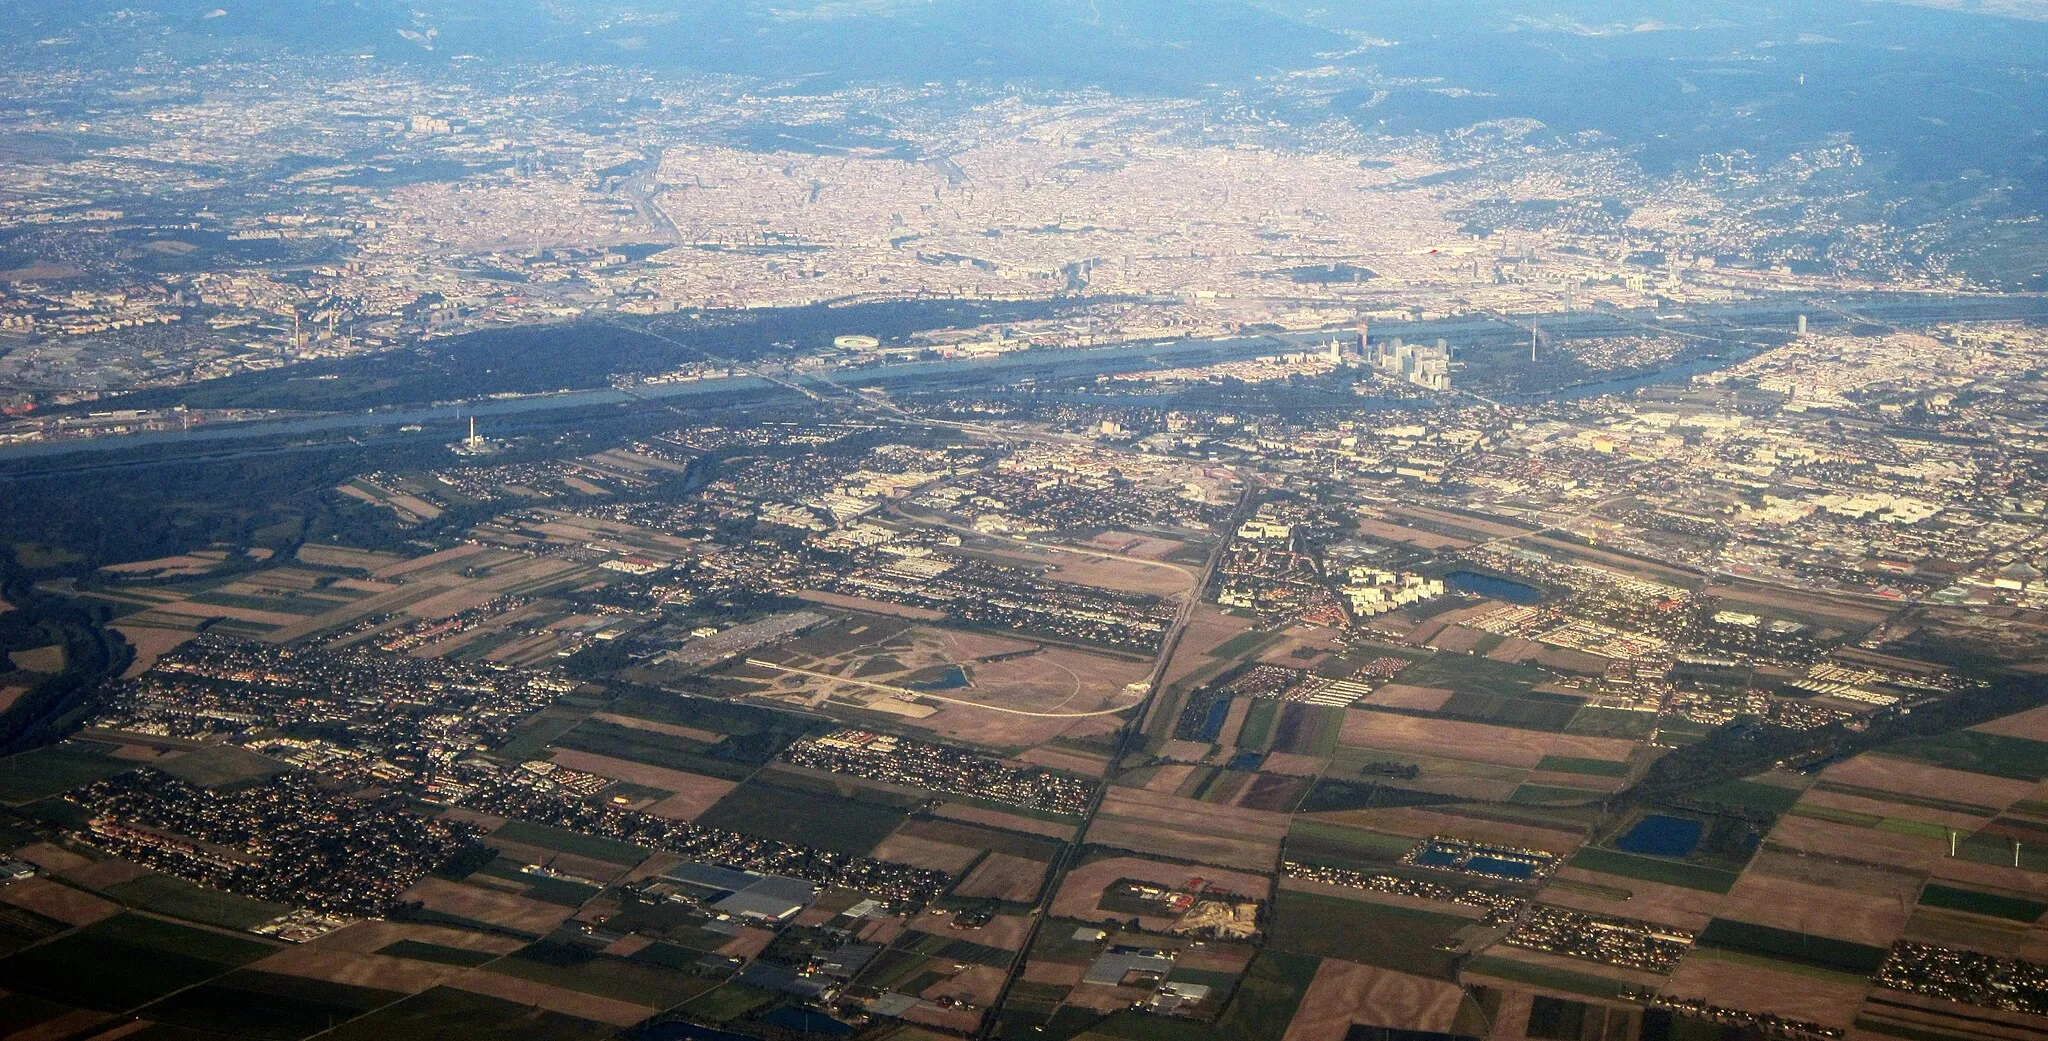 Photo showing: Aspern and Essling in Donaustadt, with central Vienna in the background, and Aspern Airfield in the center of the image